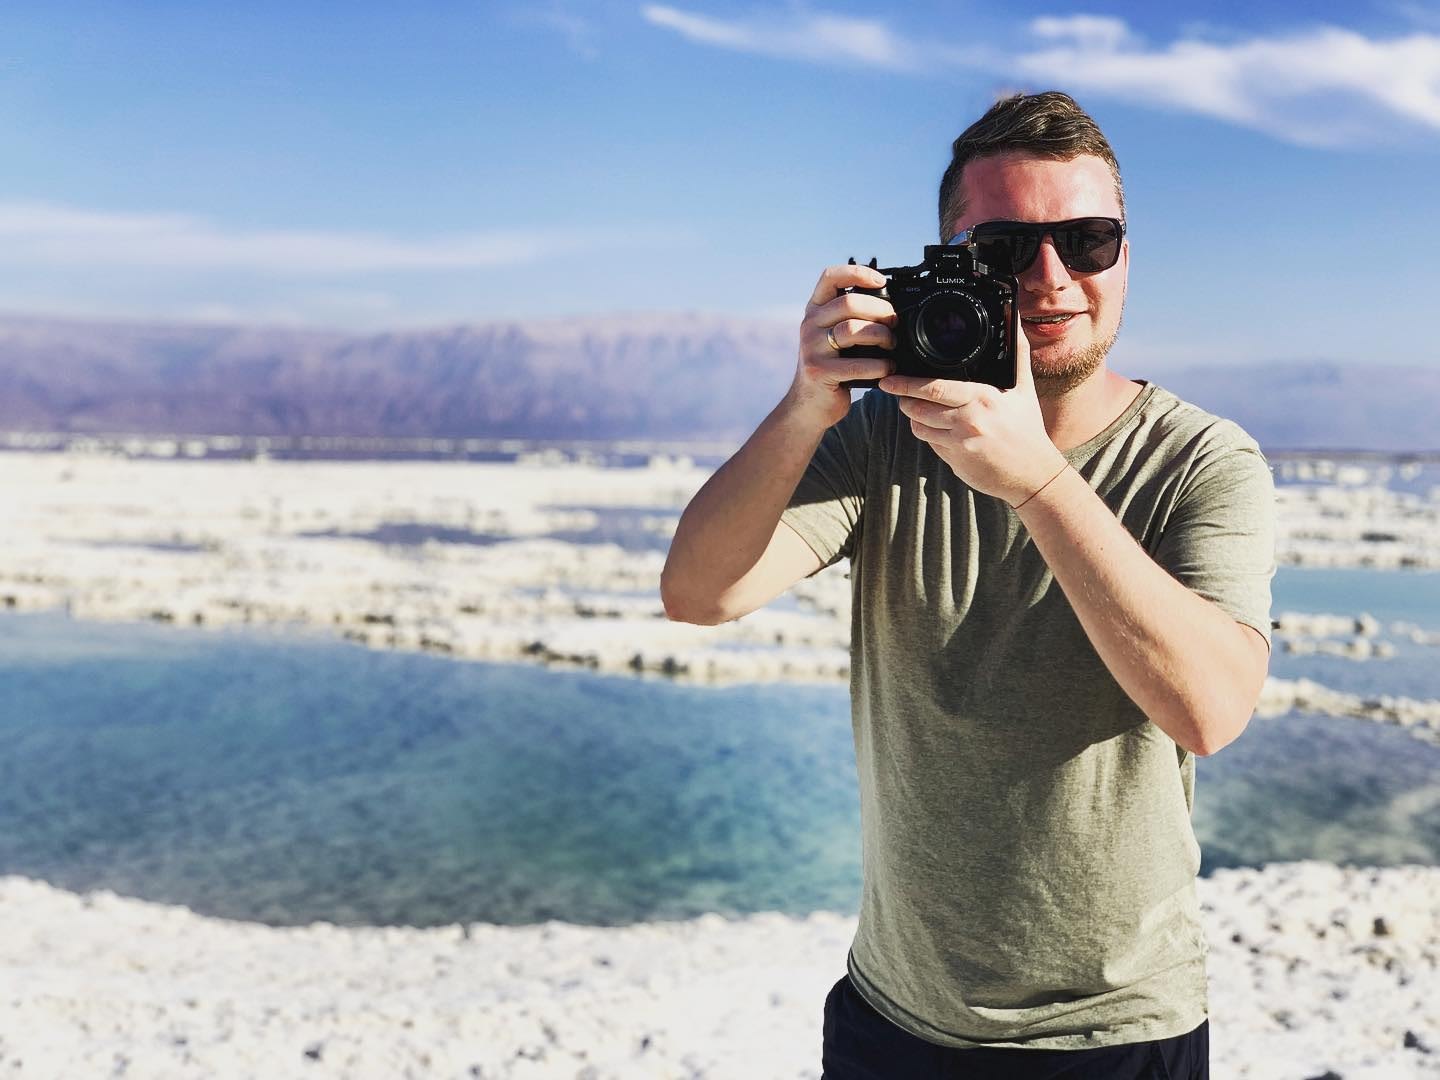 It’s the 3rd time 🧂 I’m visiting this place 🪐 tour guide offers accepted
—
#travelisrael #deadsea #israel🇮🇱 #workandtravel #videoshot #actionvideo #audiovisual #imovielt #videoediting #filming #travelvideos #businessvideo #aftermovie #stopmotion #videography #filmlocation #dayattheoffice